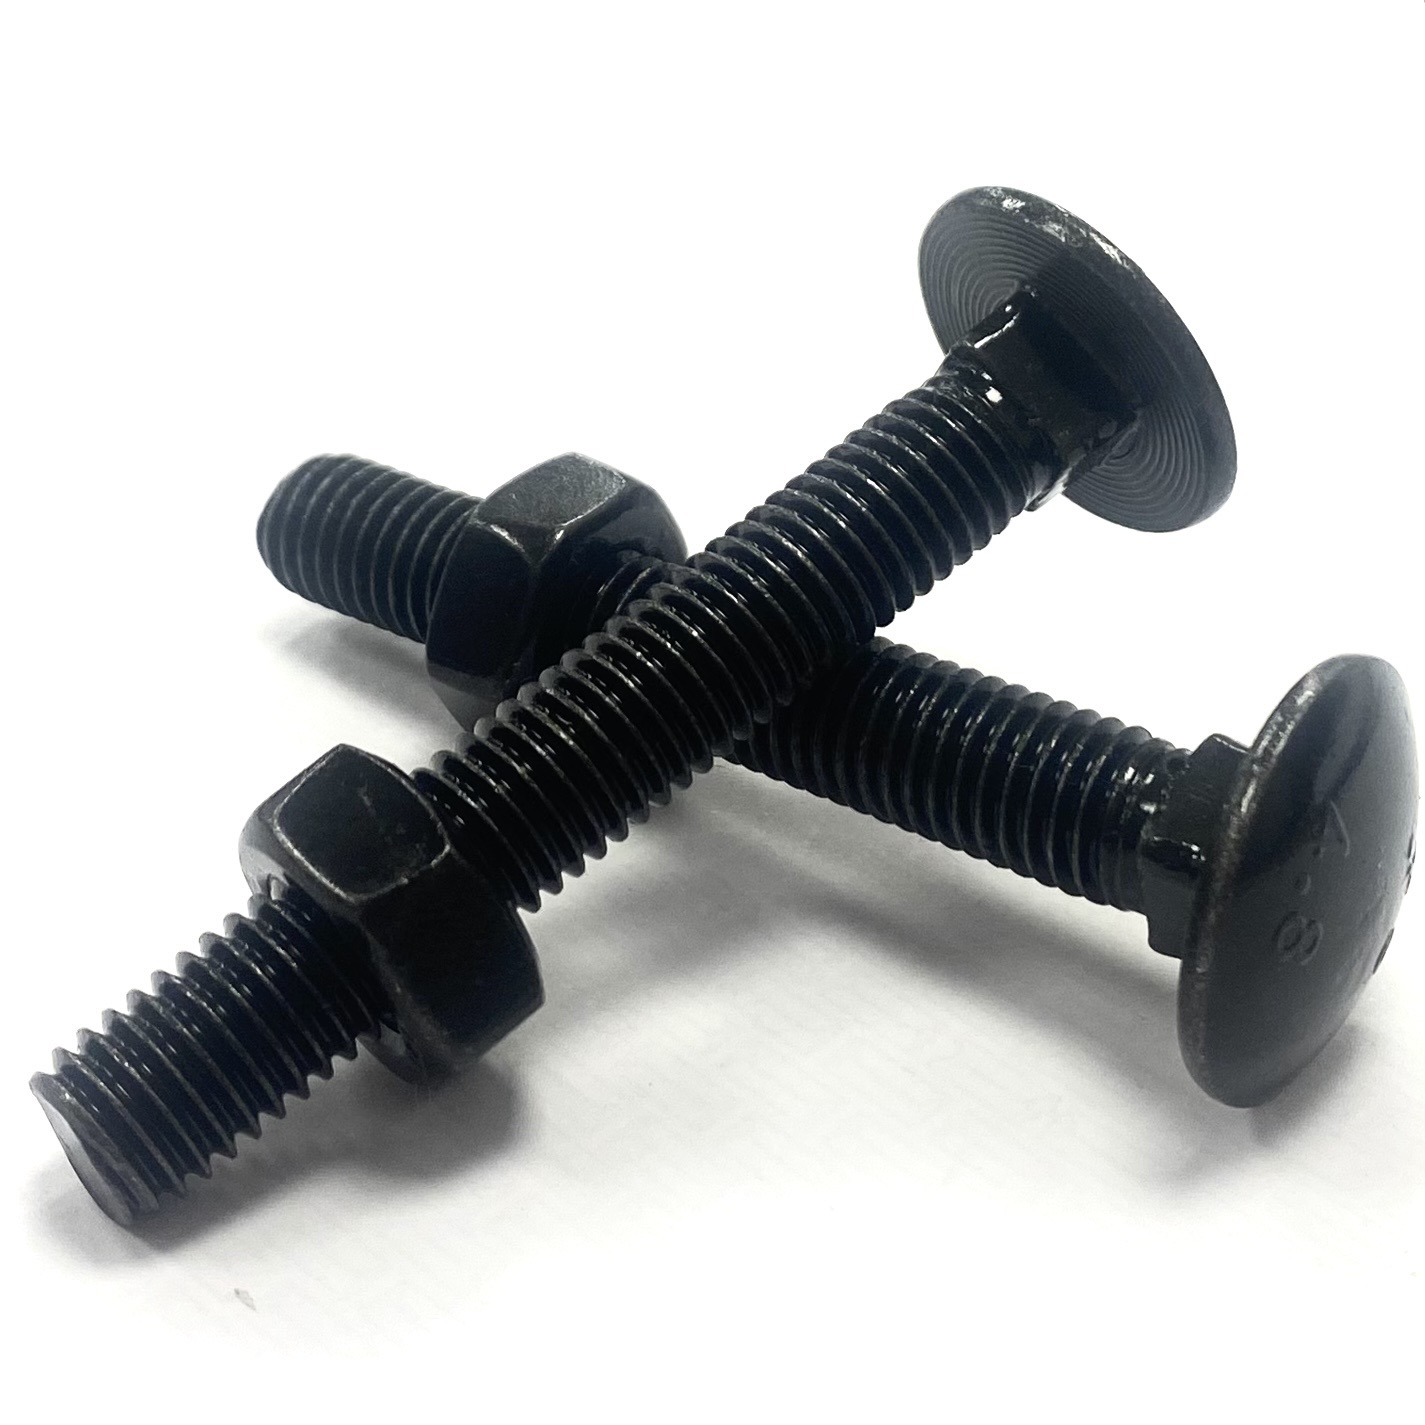 M8 x 90mm Mild Steel Carriage Coach Cup Square Bolts, with Hexagon Nut  Black Passivated Zinc Plated, DIN 603/934 Bolt WorldBolt World